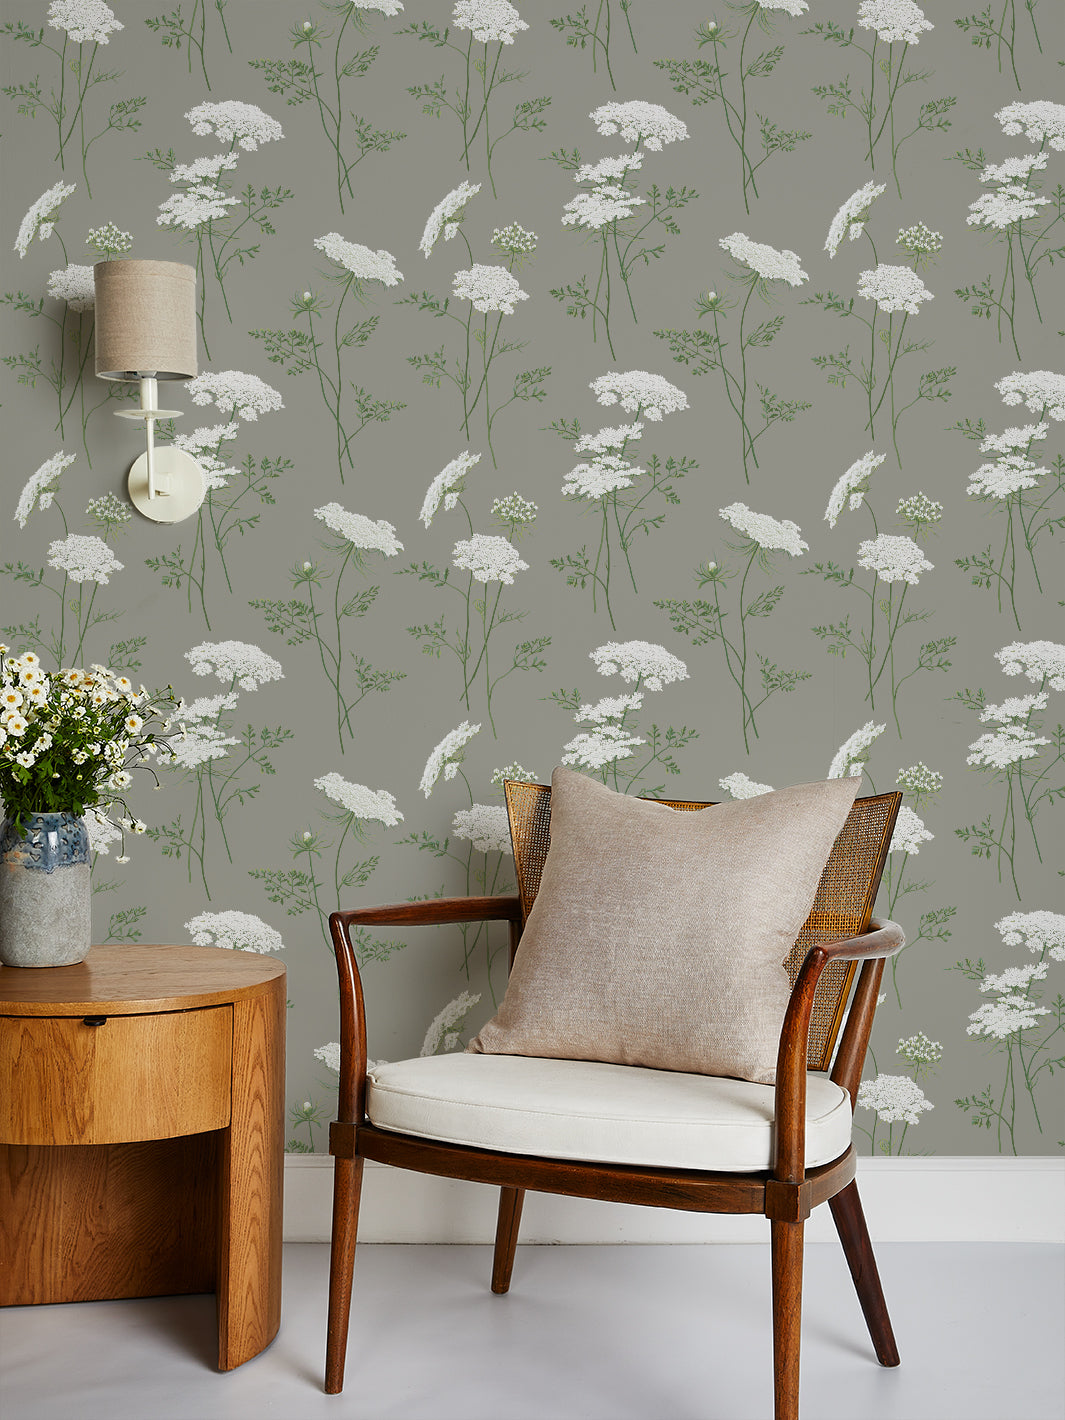 'The Queen's Lace' Wallpaper by Sarah Jessica Parker - Pepper